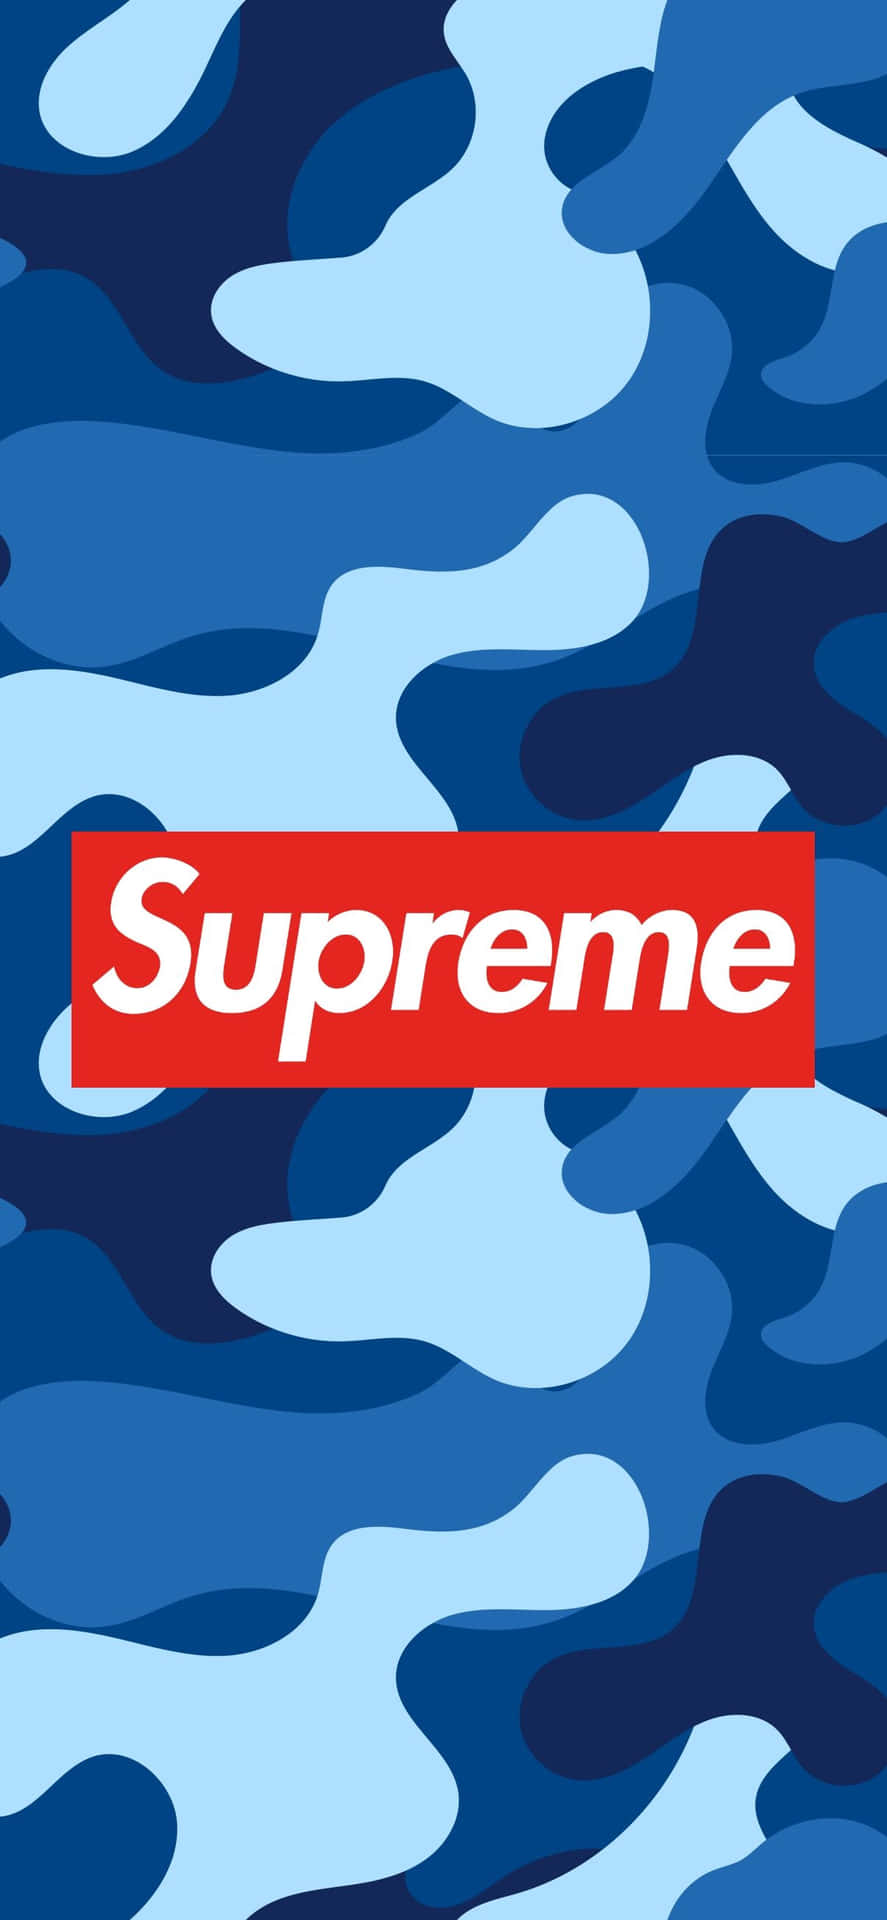 100+] Supreme Iphone Wallpapers